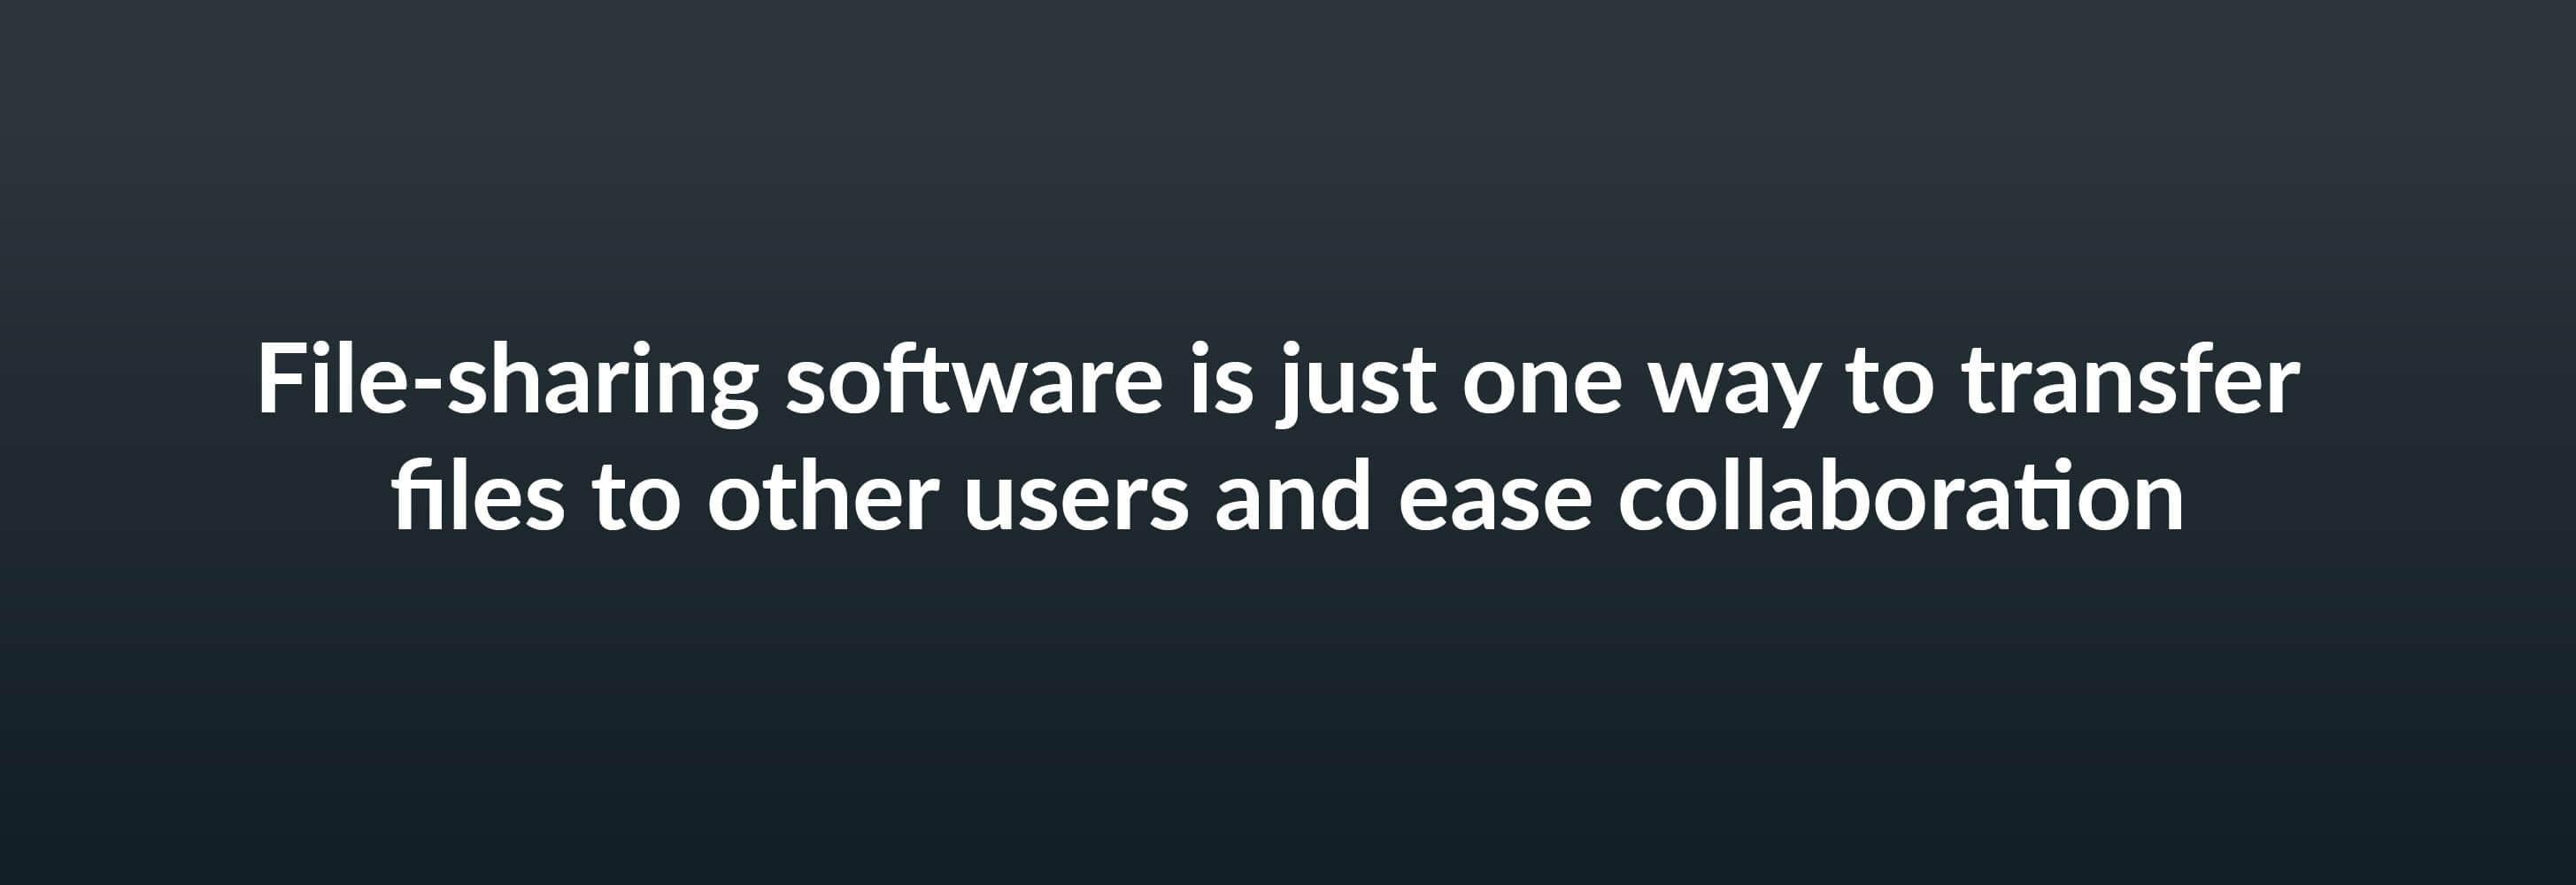 File-sharing software is just one way to transfer files to other users and ease collaboration